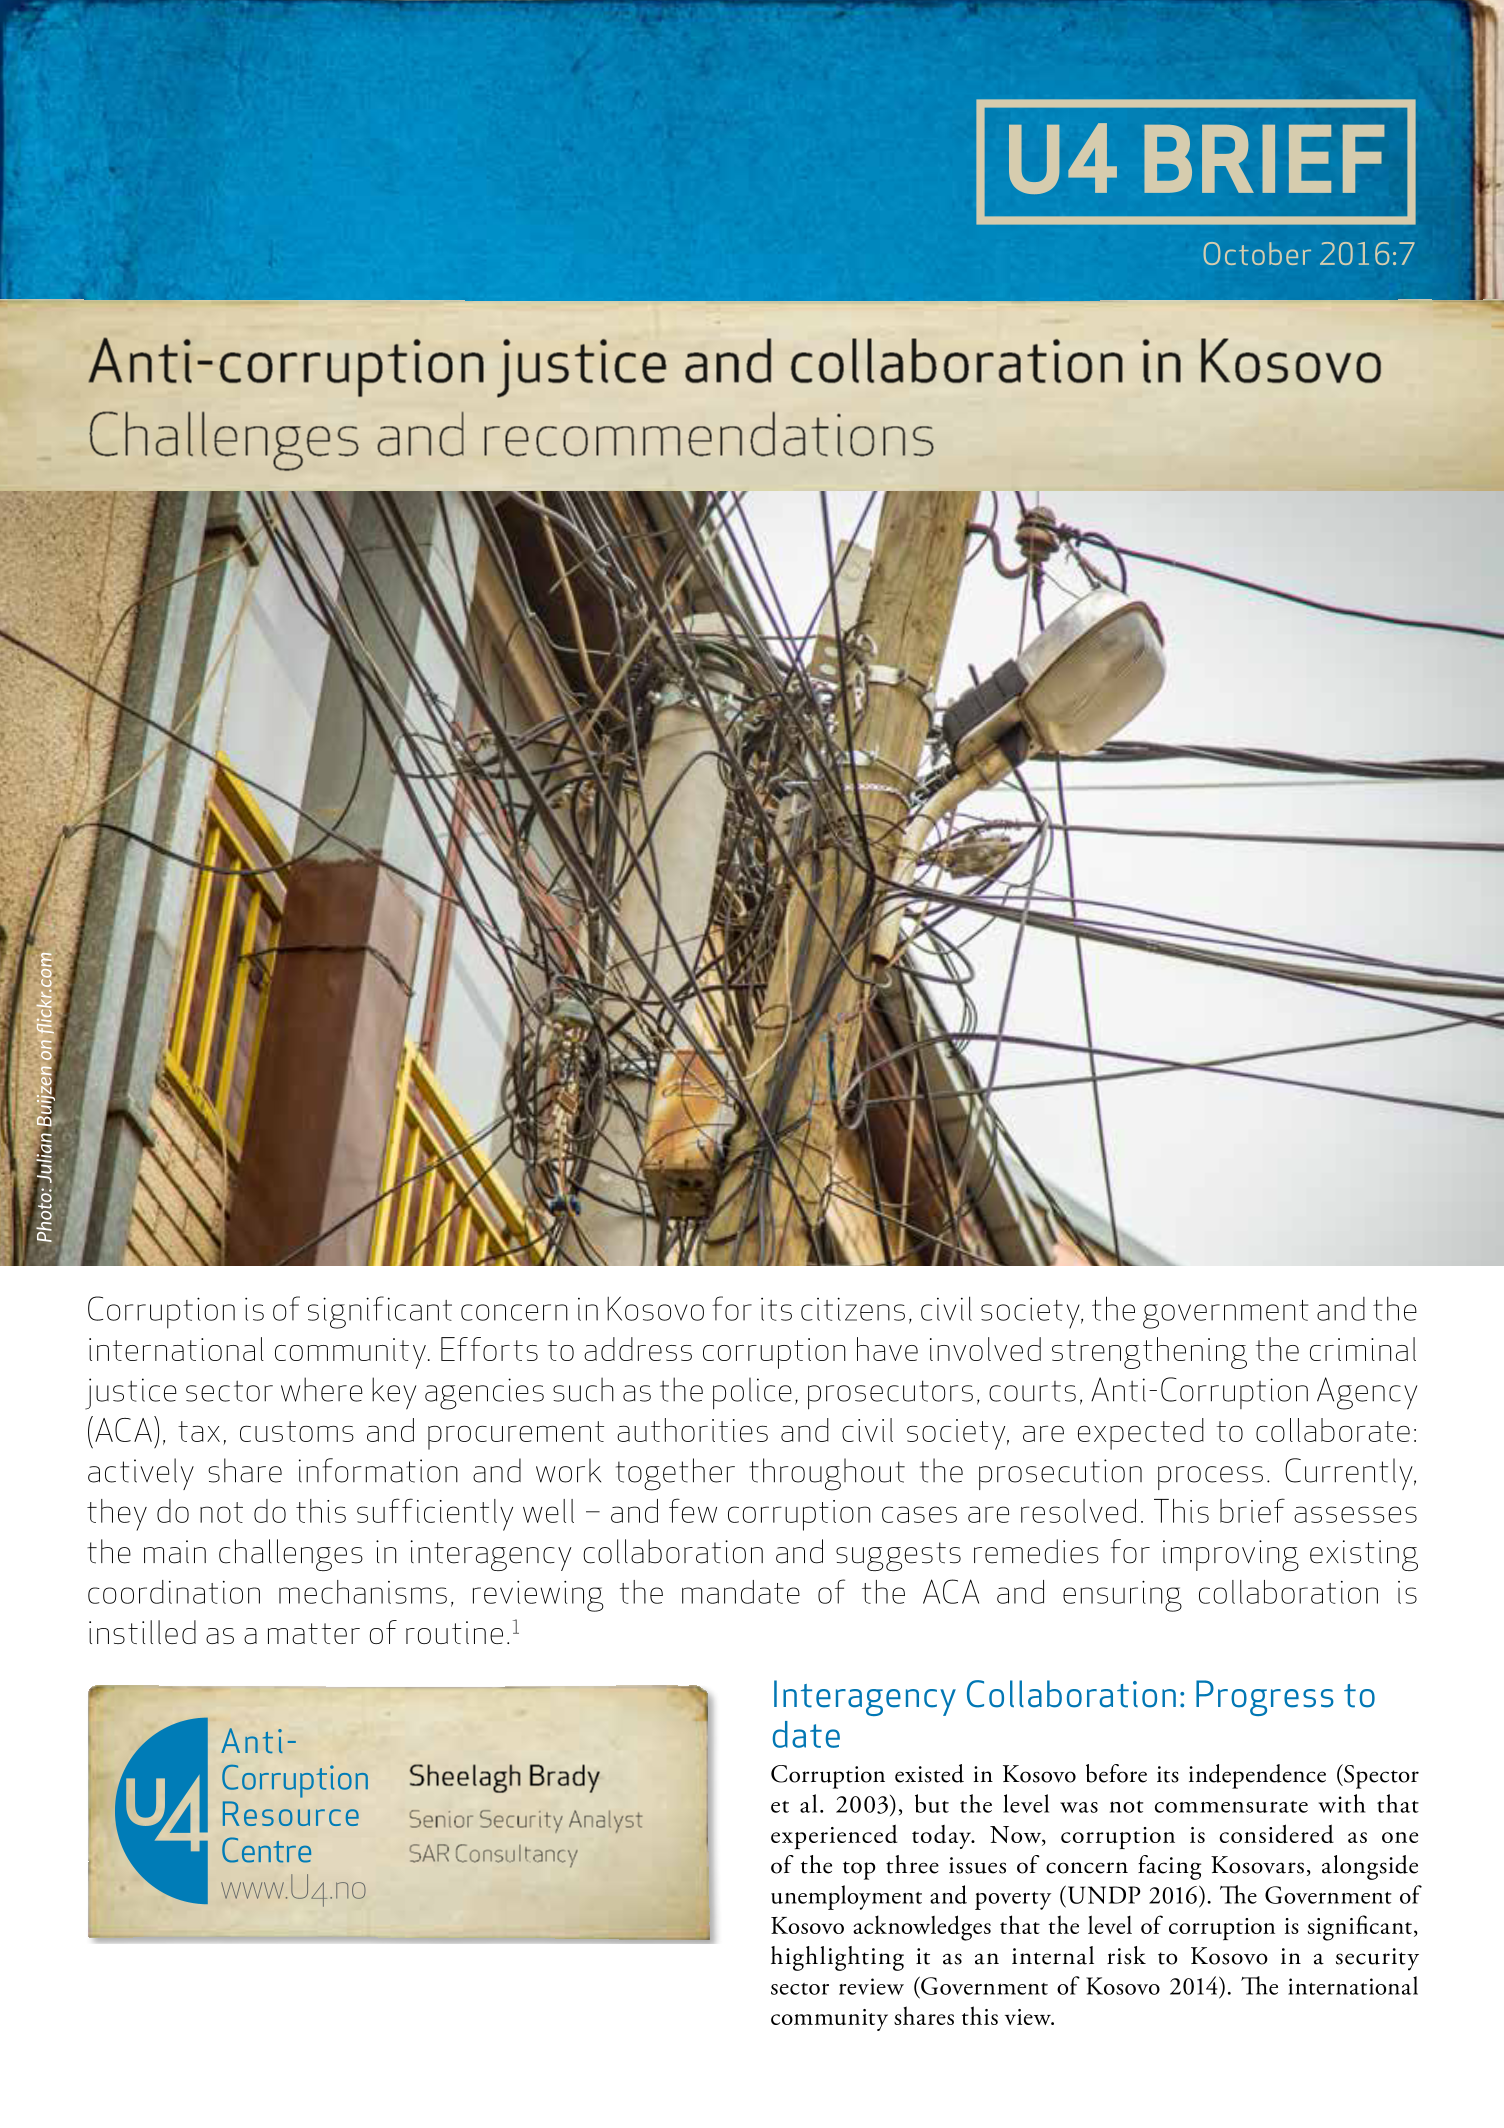 Anti-corruption justice and collaboration in Kosovo: Challenges and recommendations